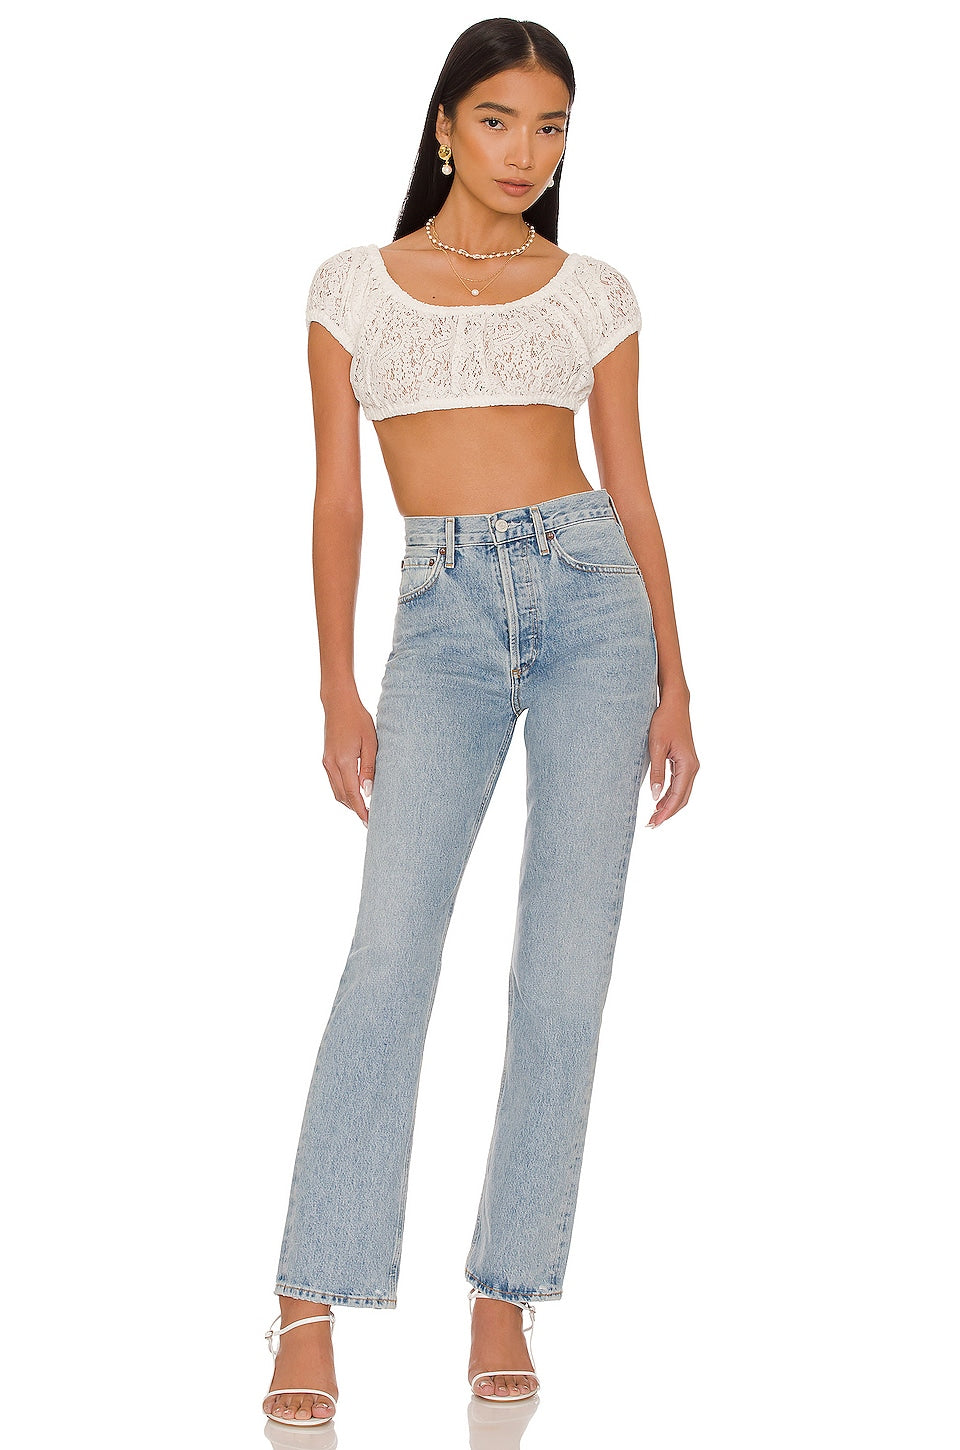 Guinevere Crop Top in IVORY